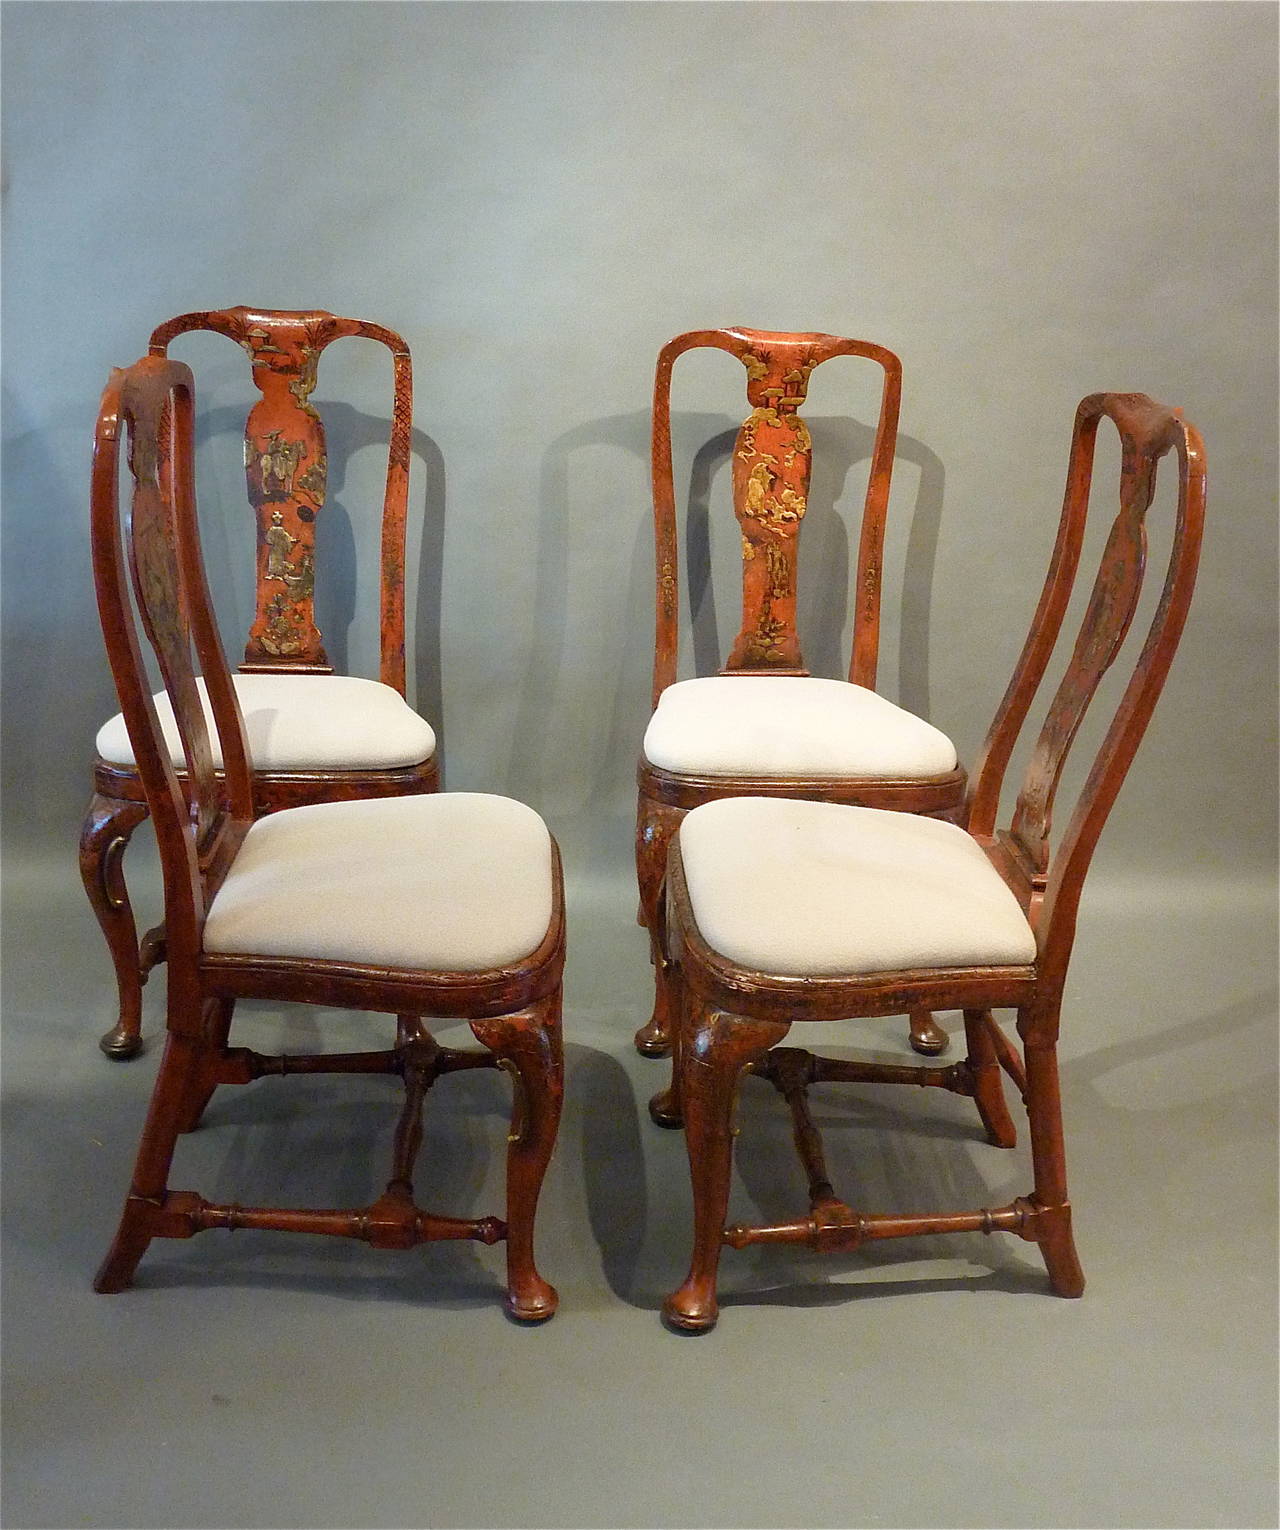 English Rare Queen Anne Period 18th Century Red Lacquered Side Chairs